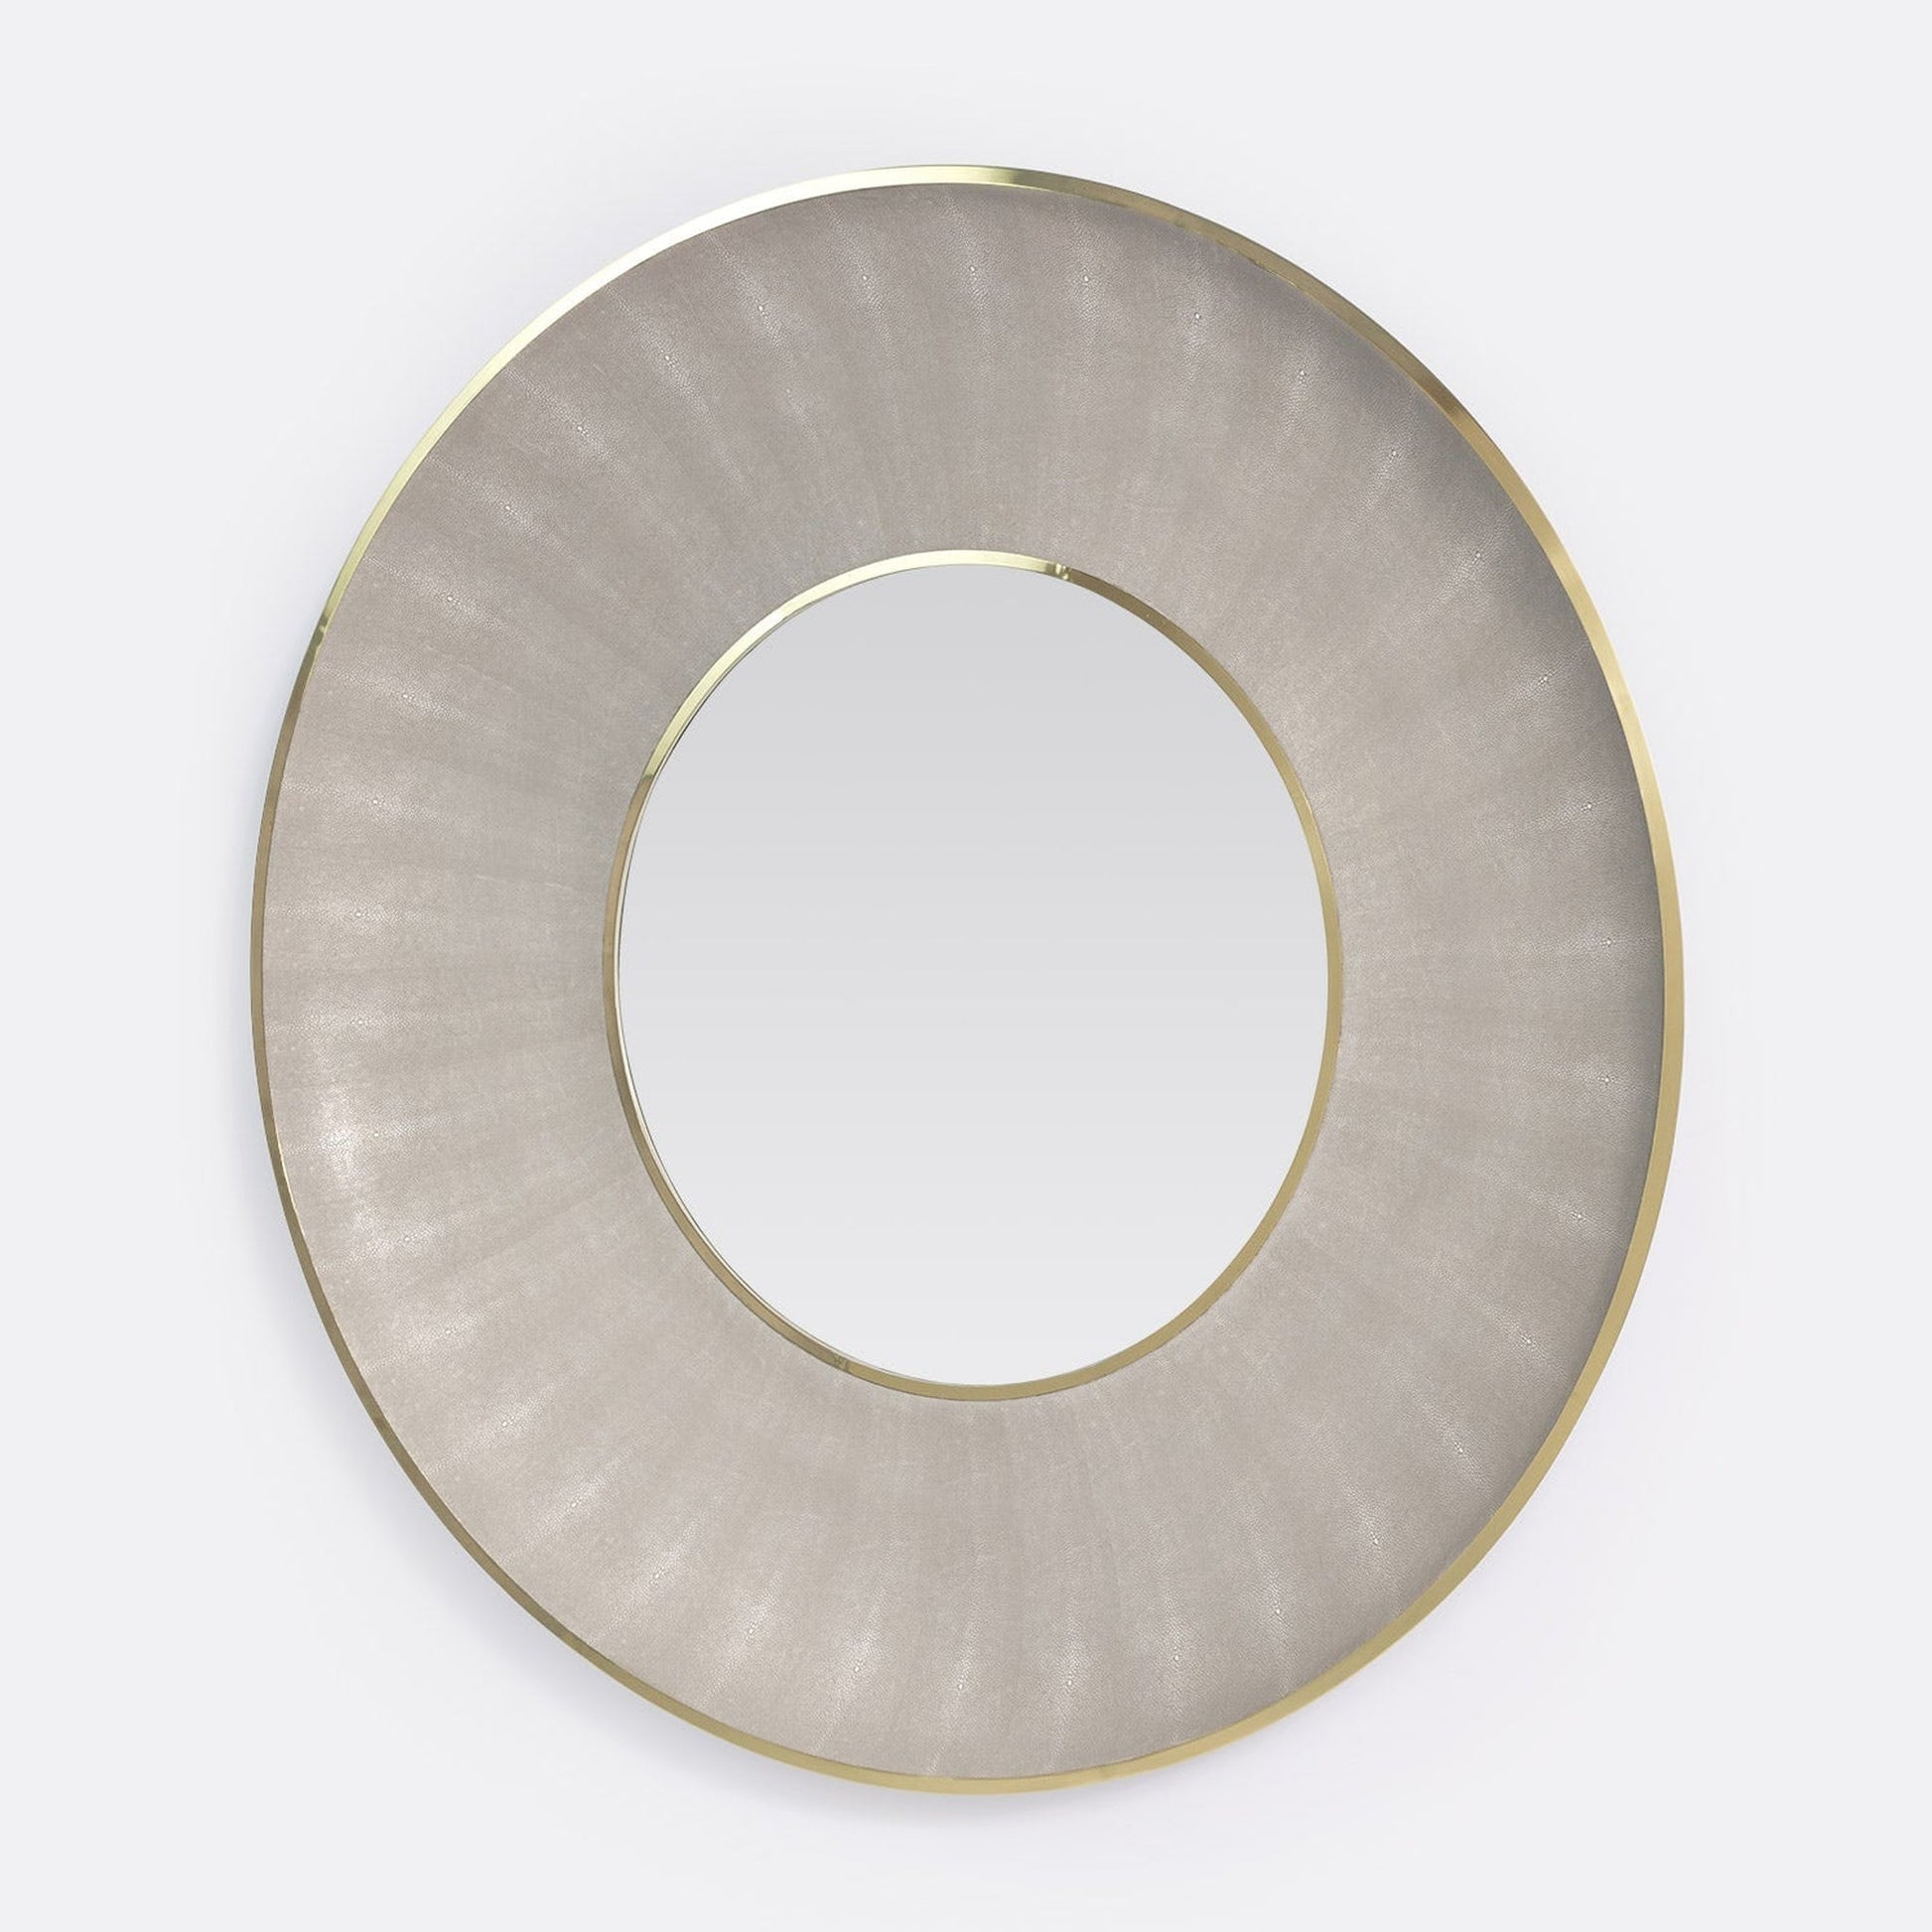 Made Goods Armond 38" Round Sand Realistic Faux Shagreen/Brass Metal Mirror